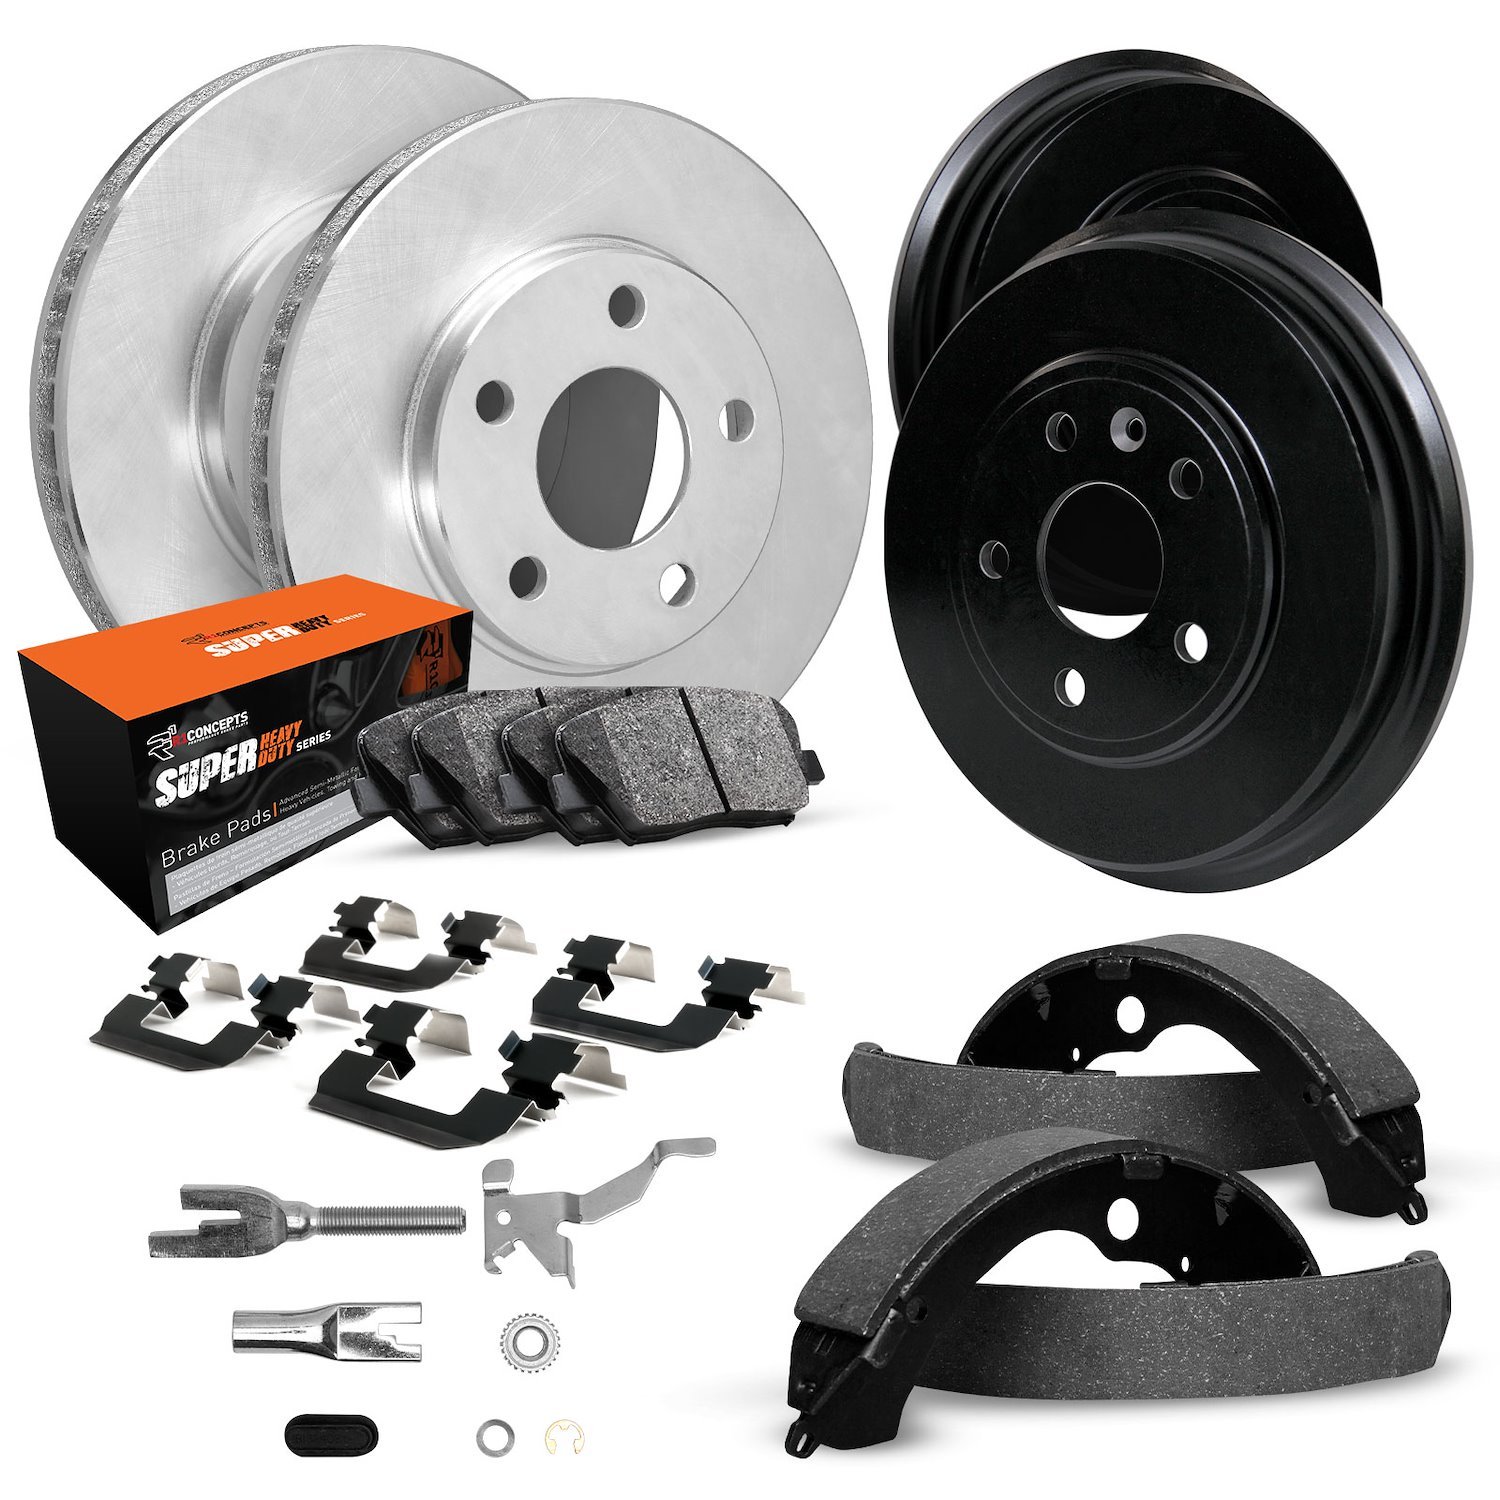 E-Line Blank Brake Rotor & Drum Set w/Super-Duty Pads, Shoes, Hardware, & Adjusters, 1973-1975 GM, Position: Front & Rear